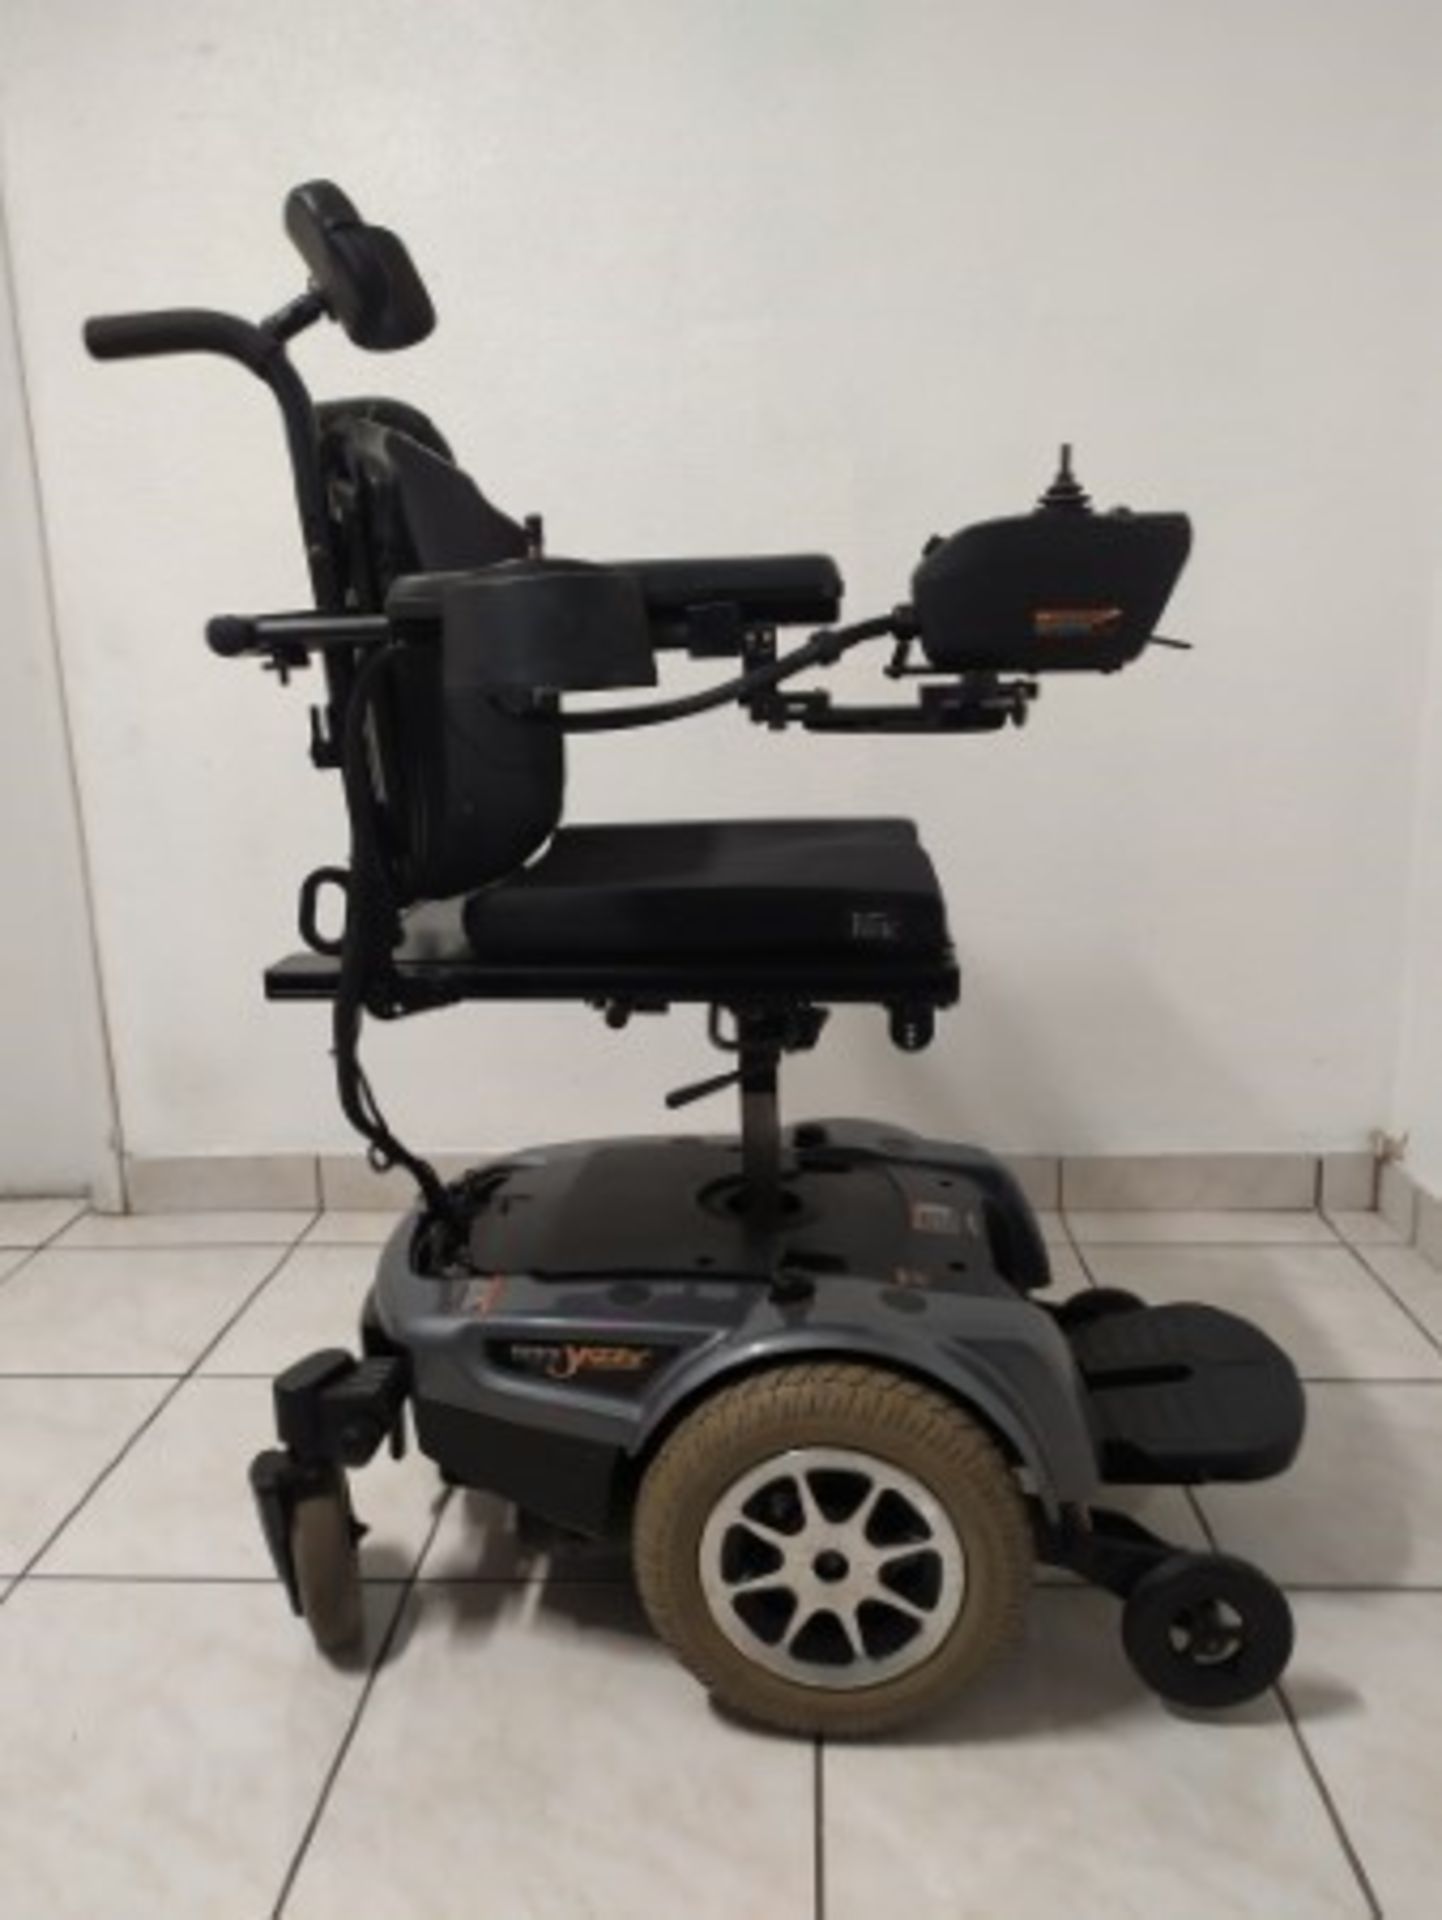 2008 PRIDE JAZZY 1122 6-WHEEL REHAB POWER CHAIR WITH SEAT WITH RAISE & LOWER FEATURES - GRAY - 300LB - Image 5 of 5